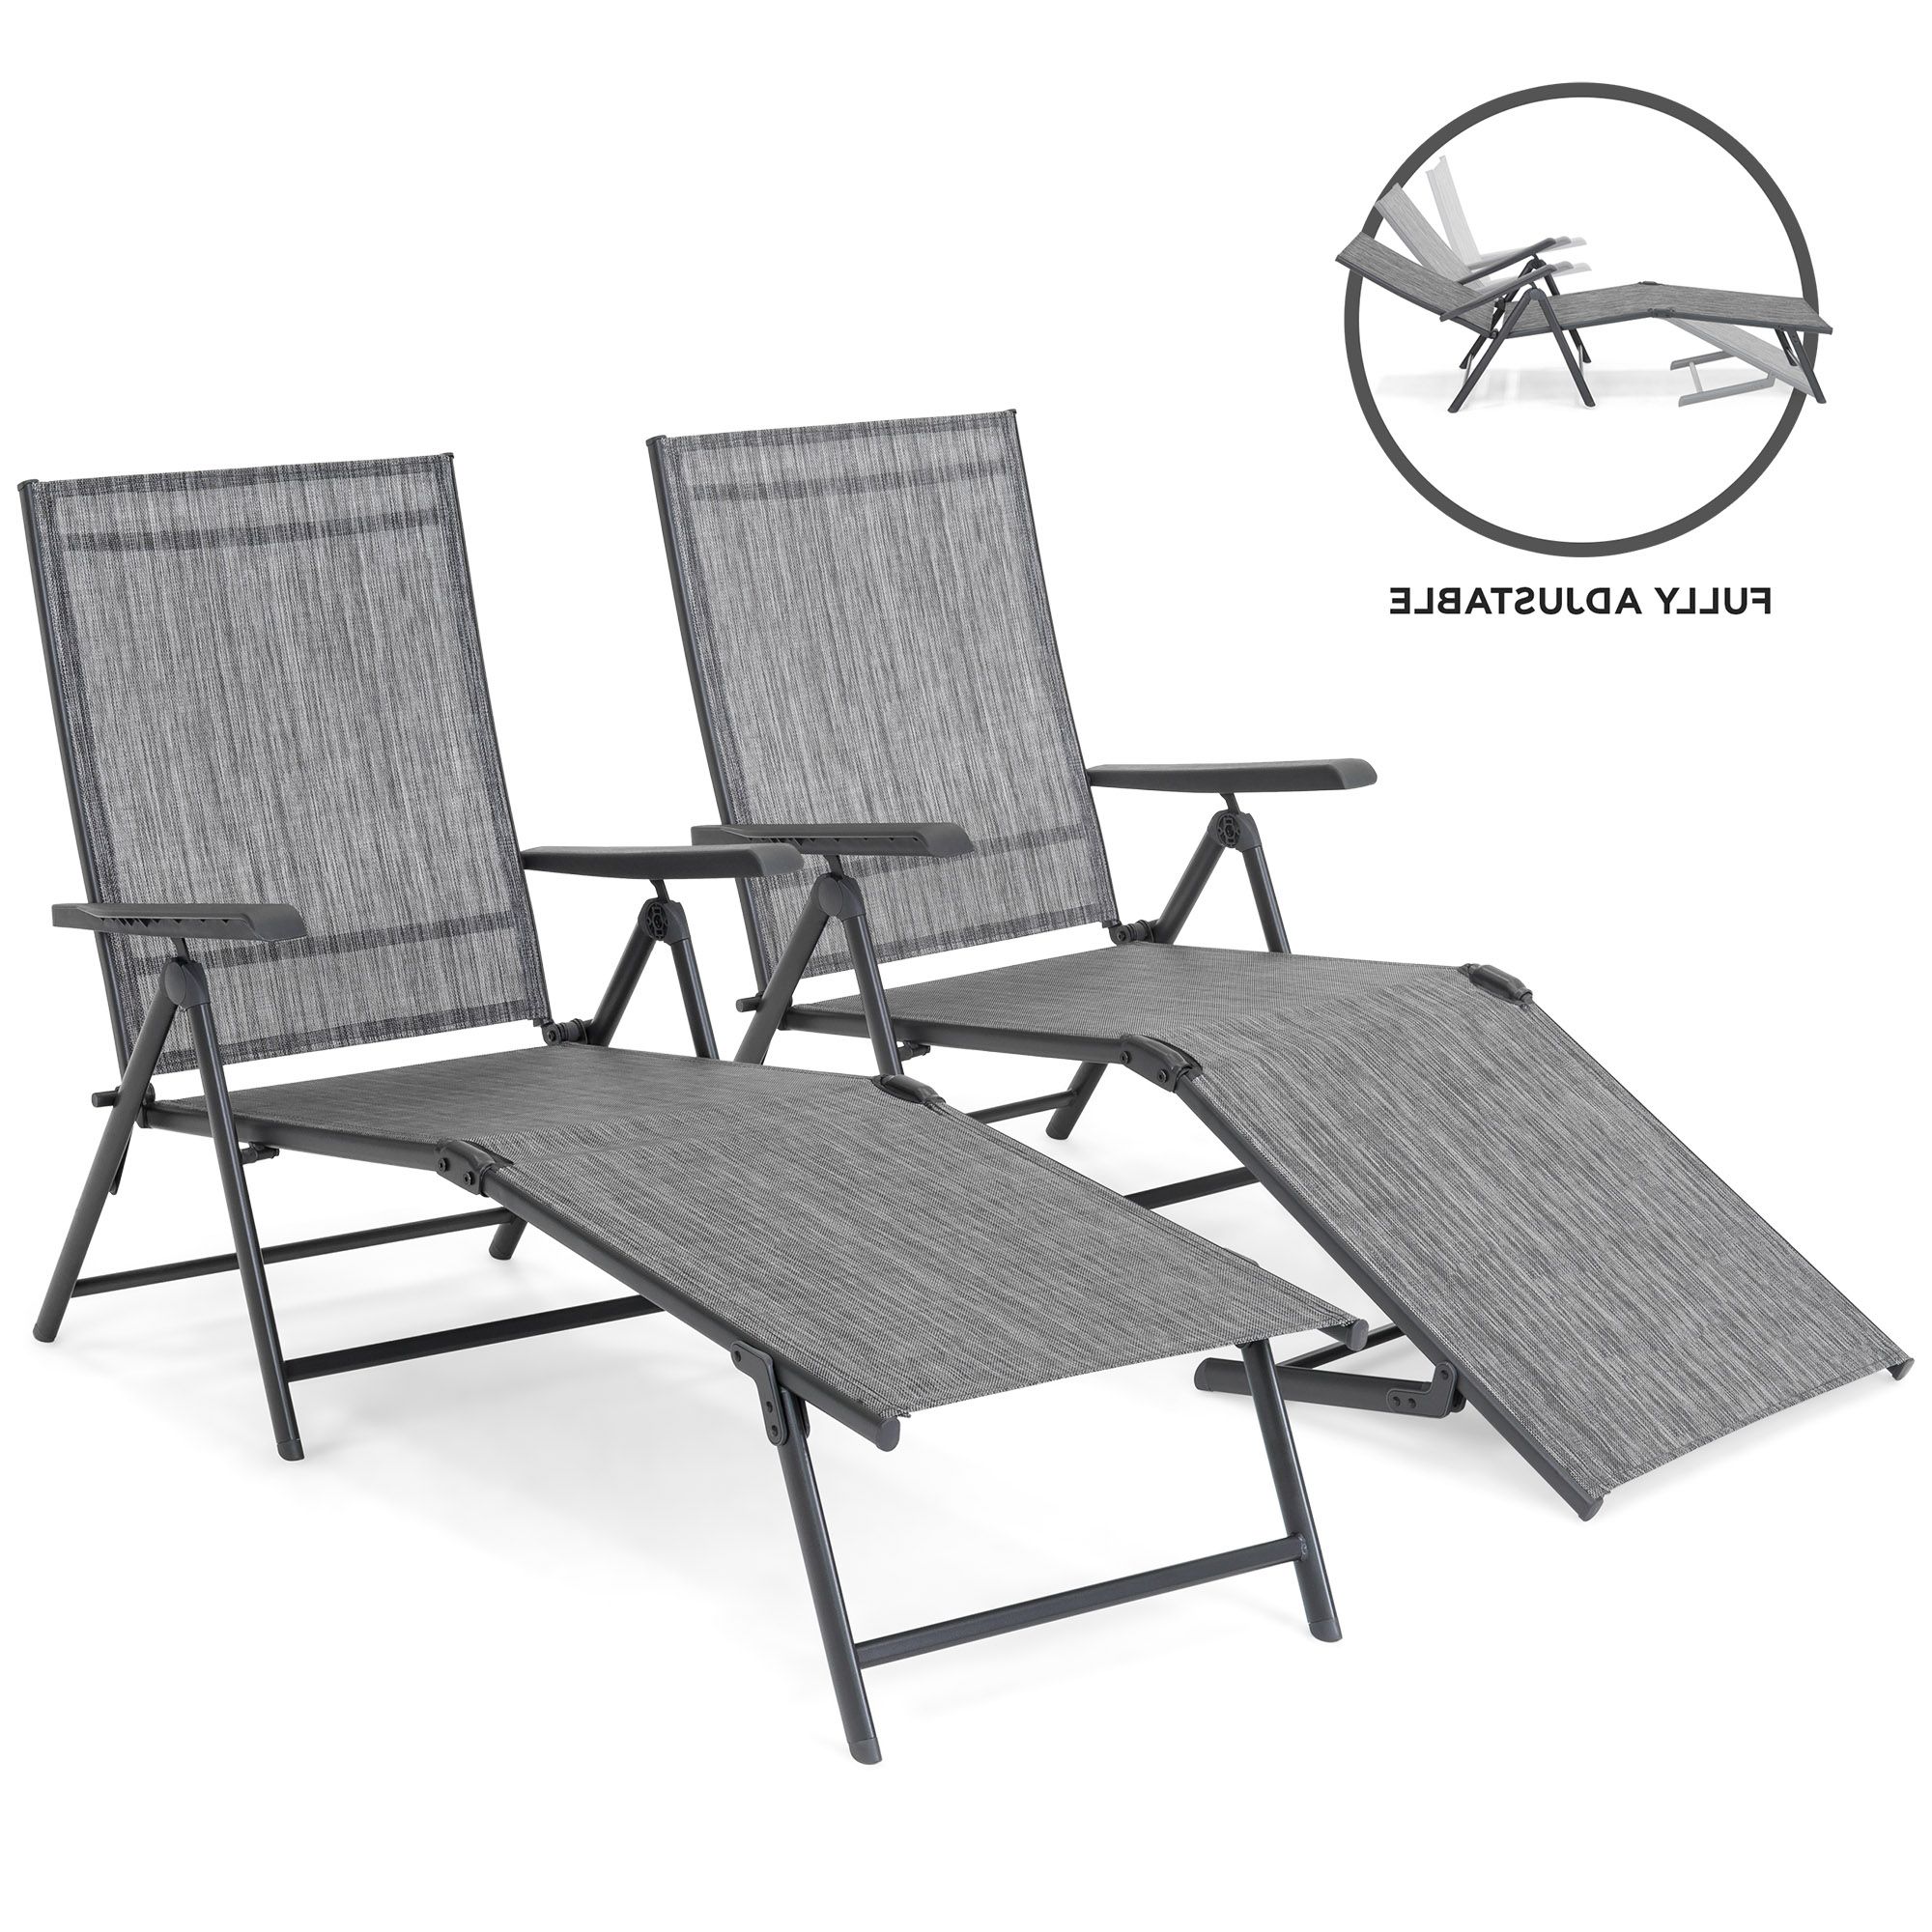 Cart Wheel Adjustable Chaise Lounge Chairs With Well Known Best Choice Products Set Of 2 Outdoor Adjustable Folding Chaise Reclining  Lounge Chairs For Patio, Poolside, Deck W/ Rust Resistant Steel Frame, (View 12 of 25)